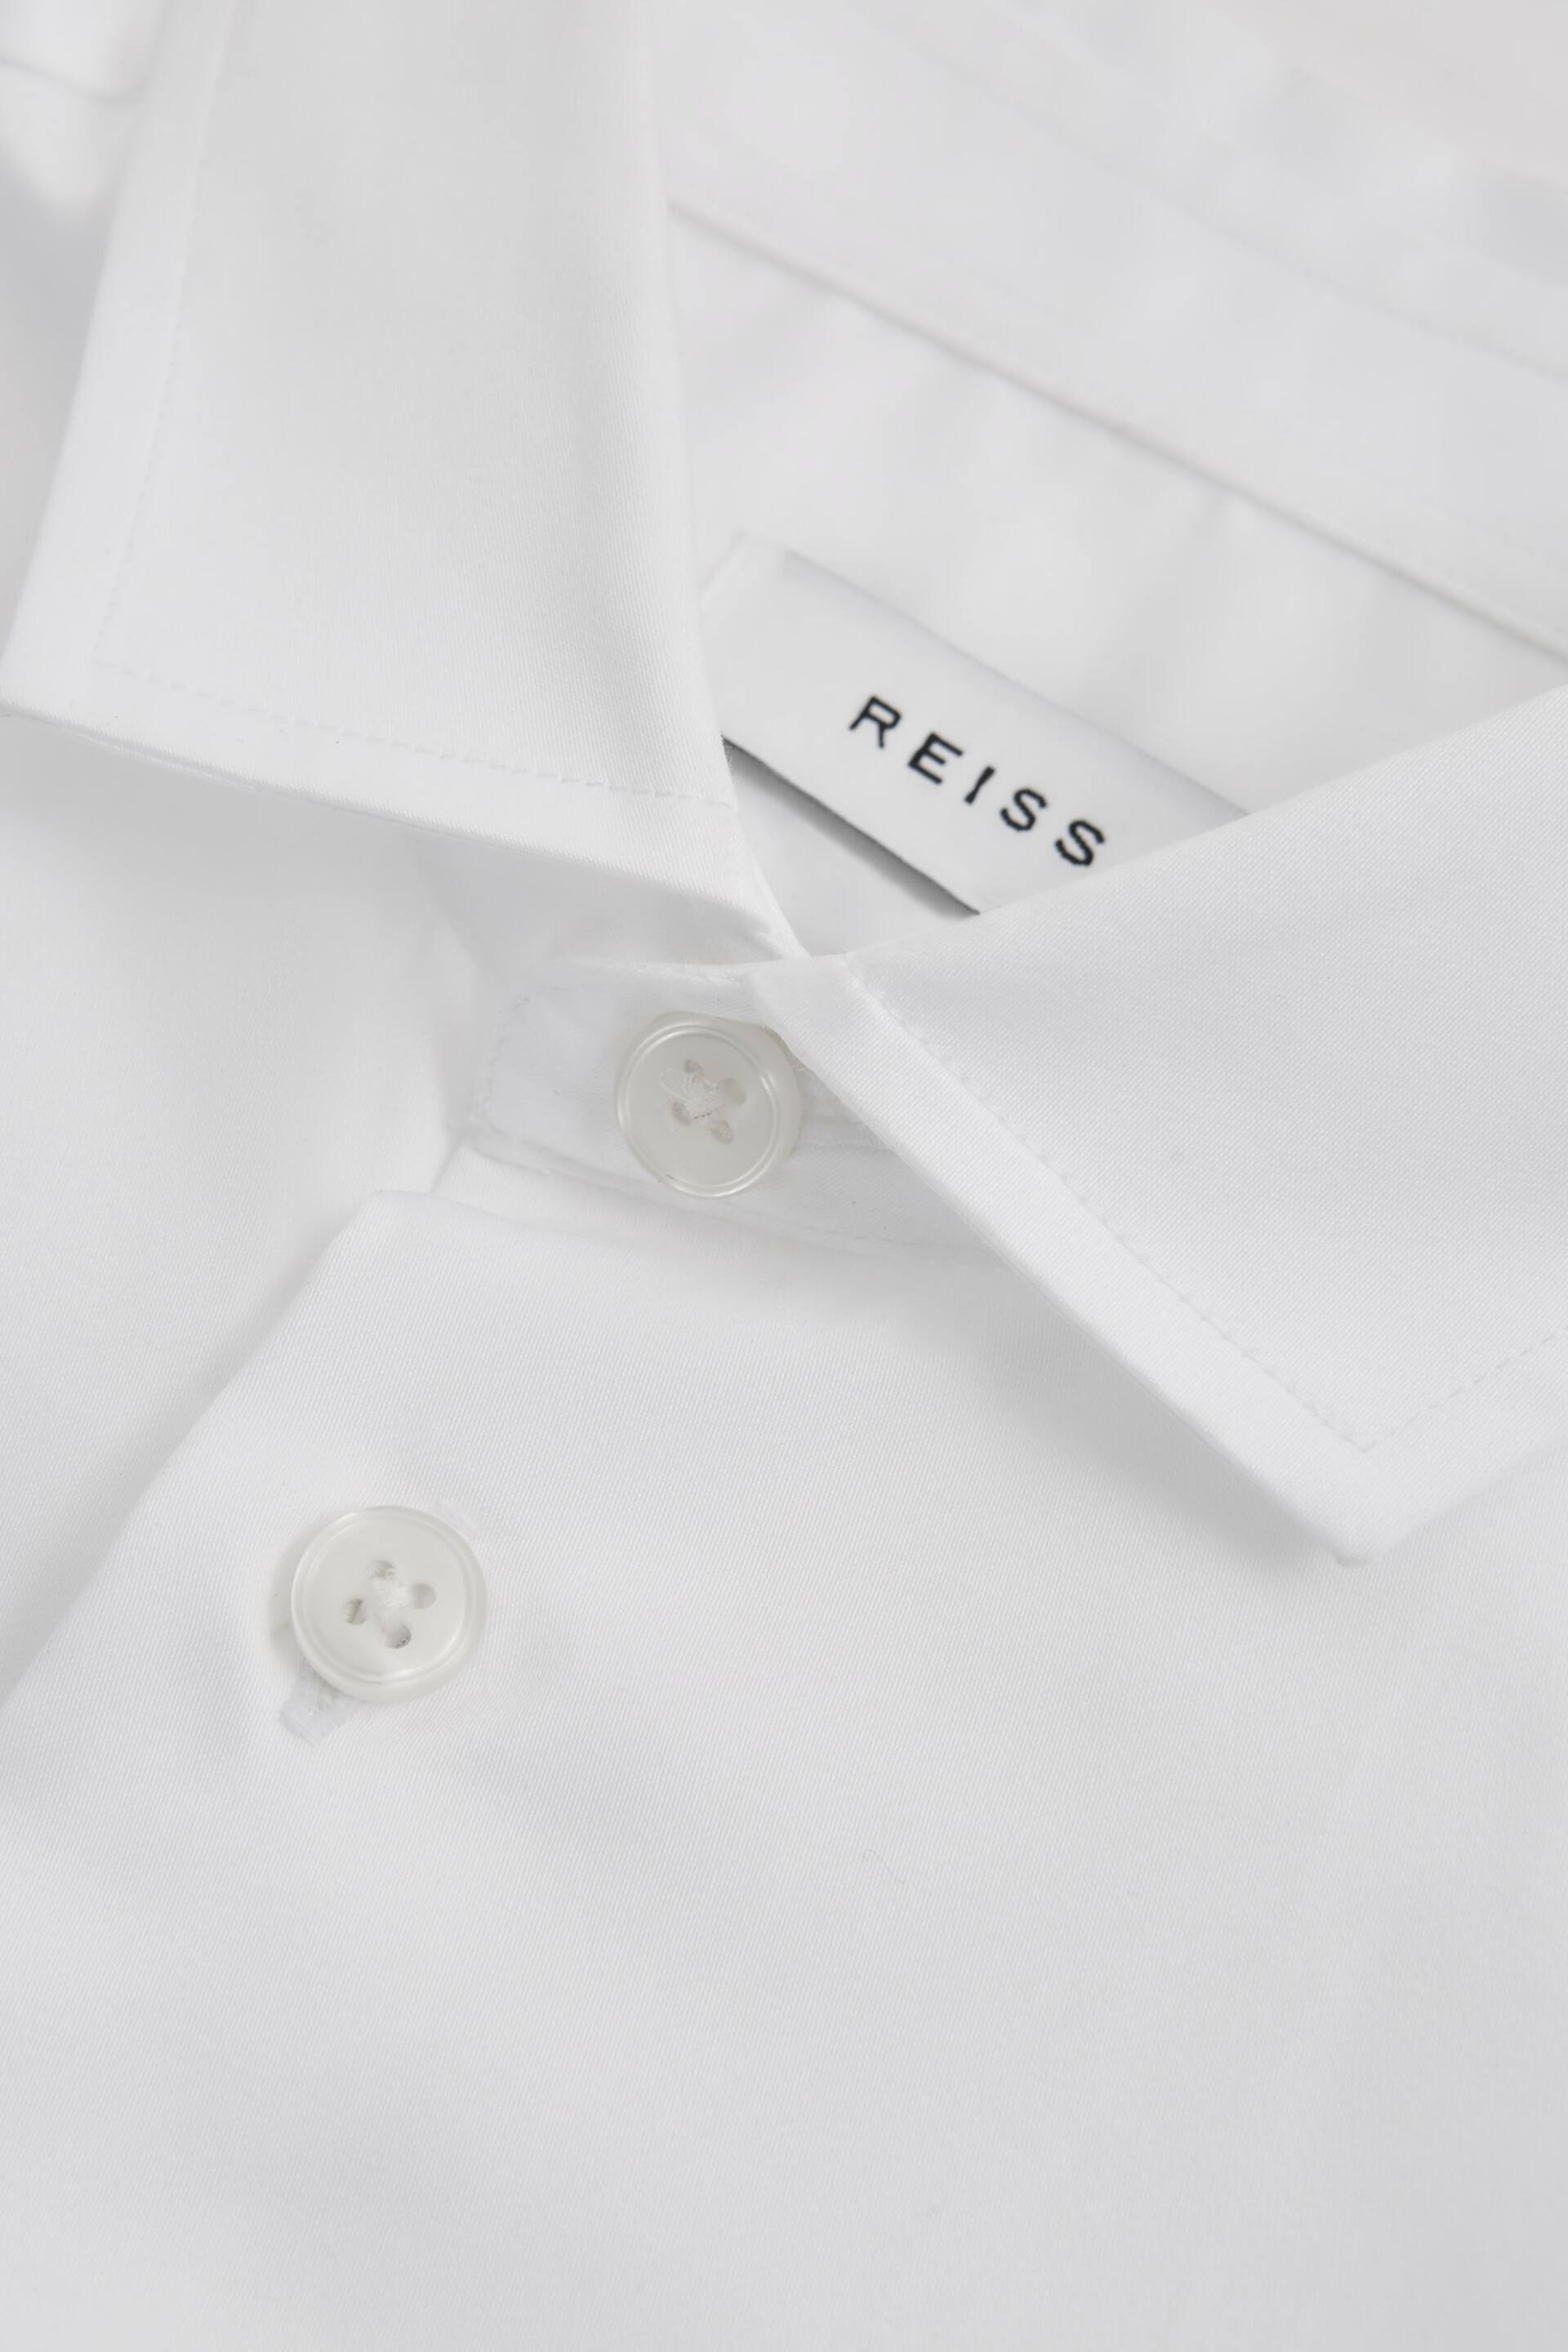 Reiss White Remote Teen Slim Fit Cotton Shirt - Image 6 of 6